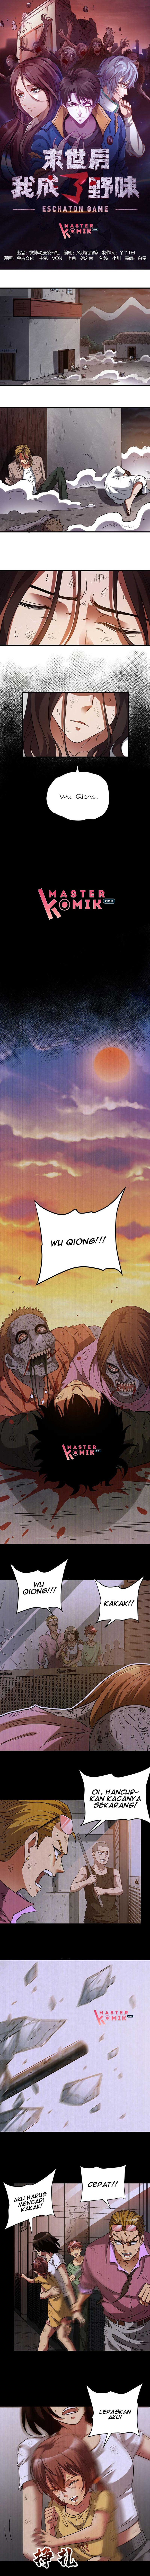 Strongest Evolution Of Zombie Chapter 20